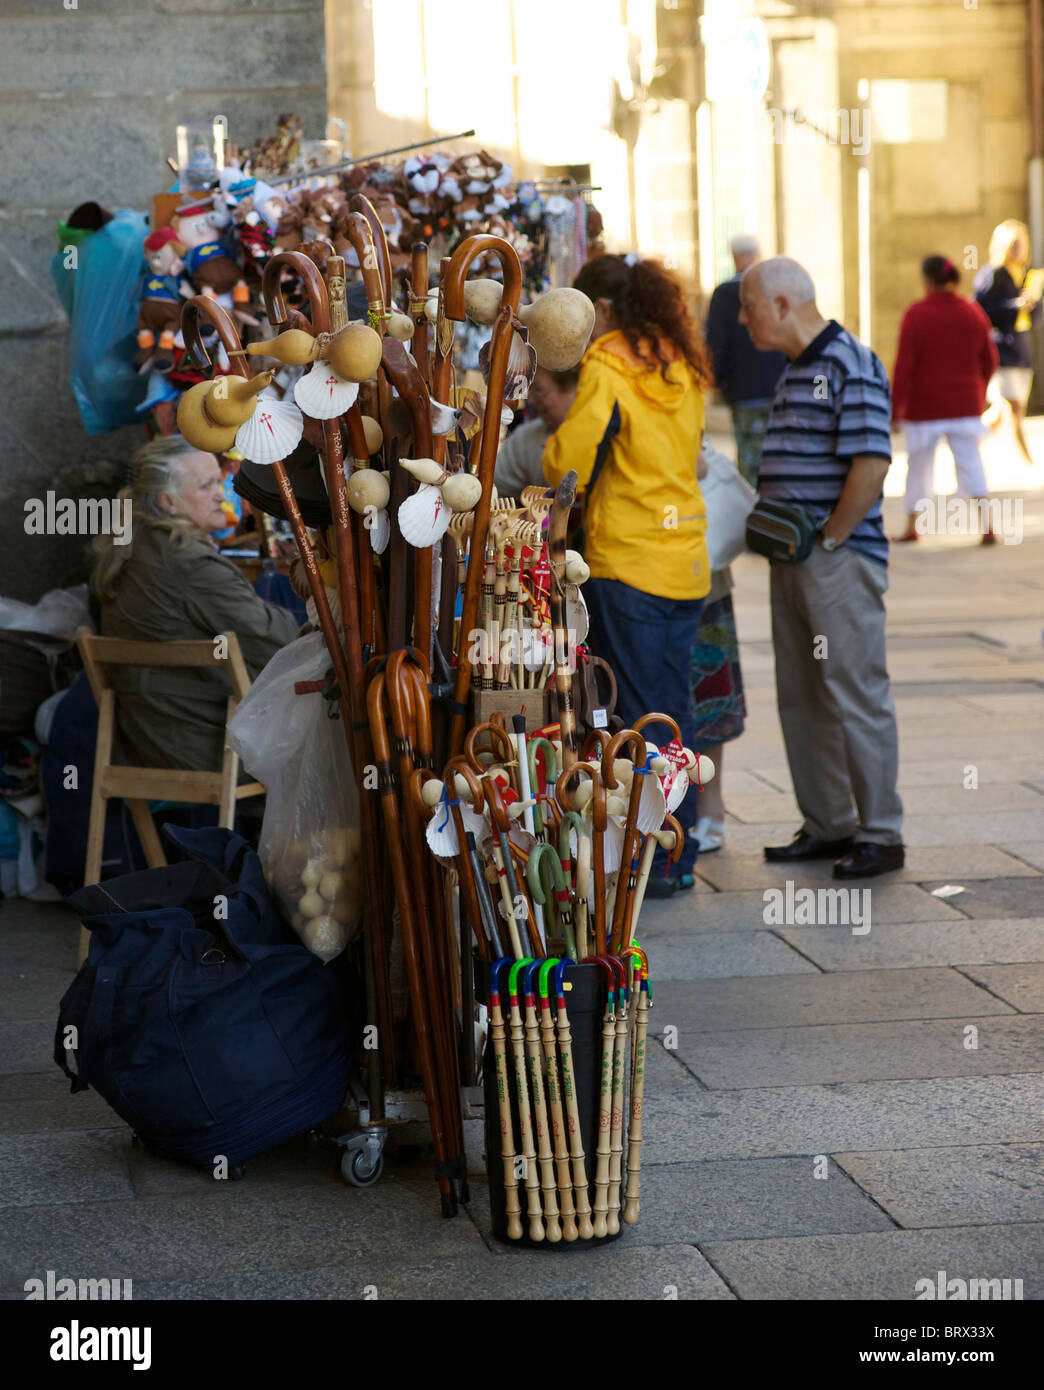 Pilgrim's staffs, shells and gourds for sale in street in Santiago de Compostela. Stock Photo